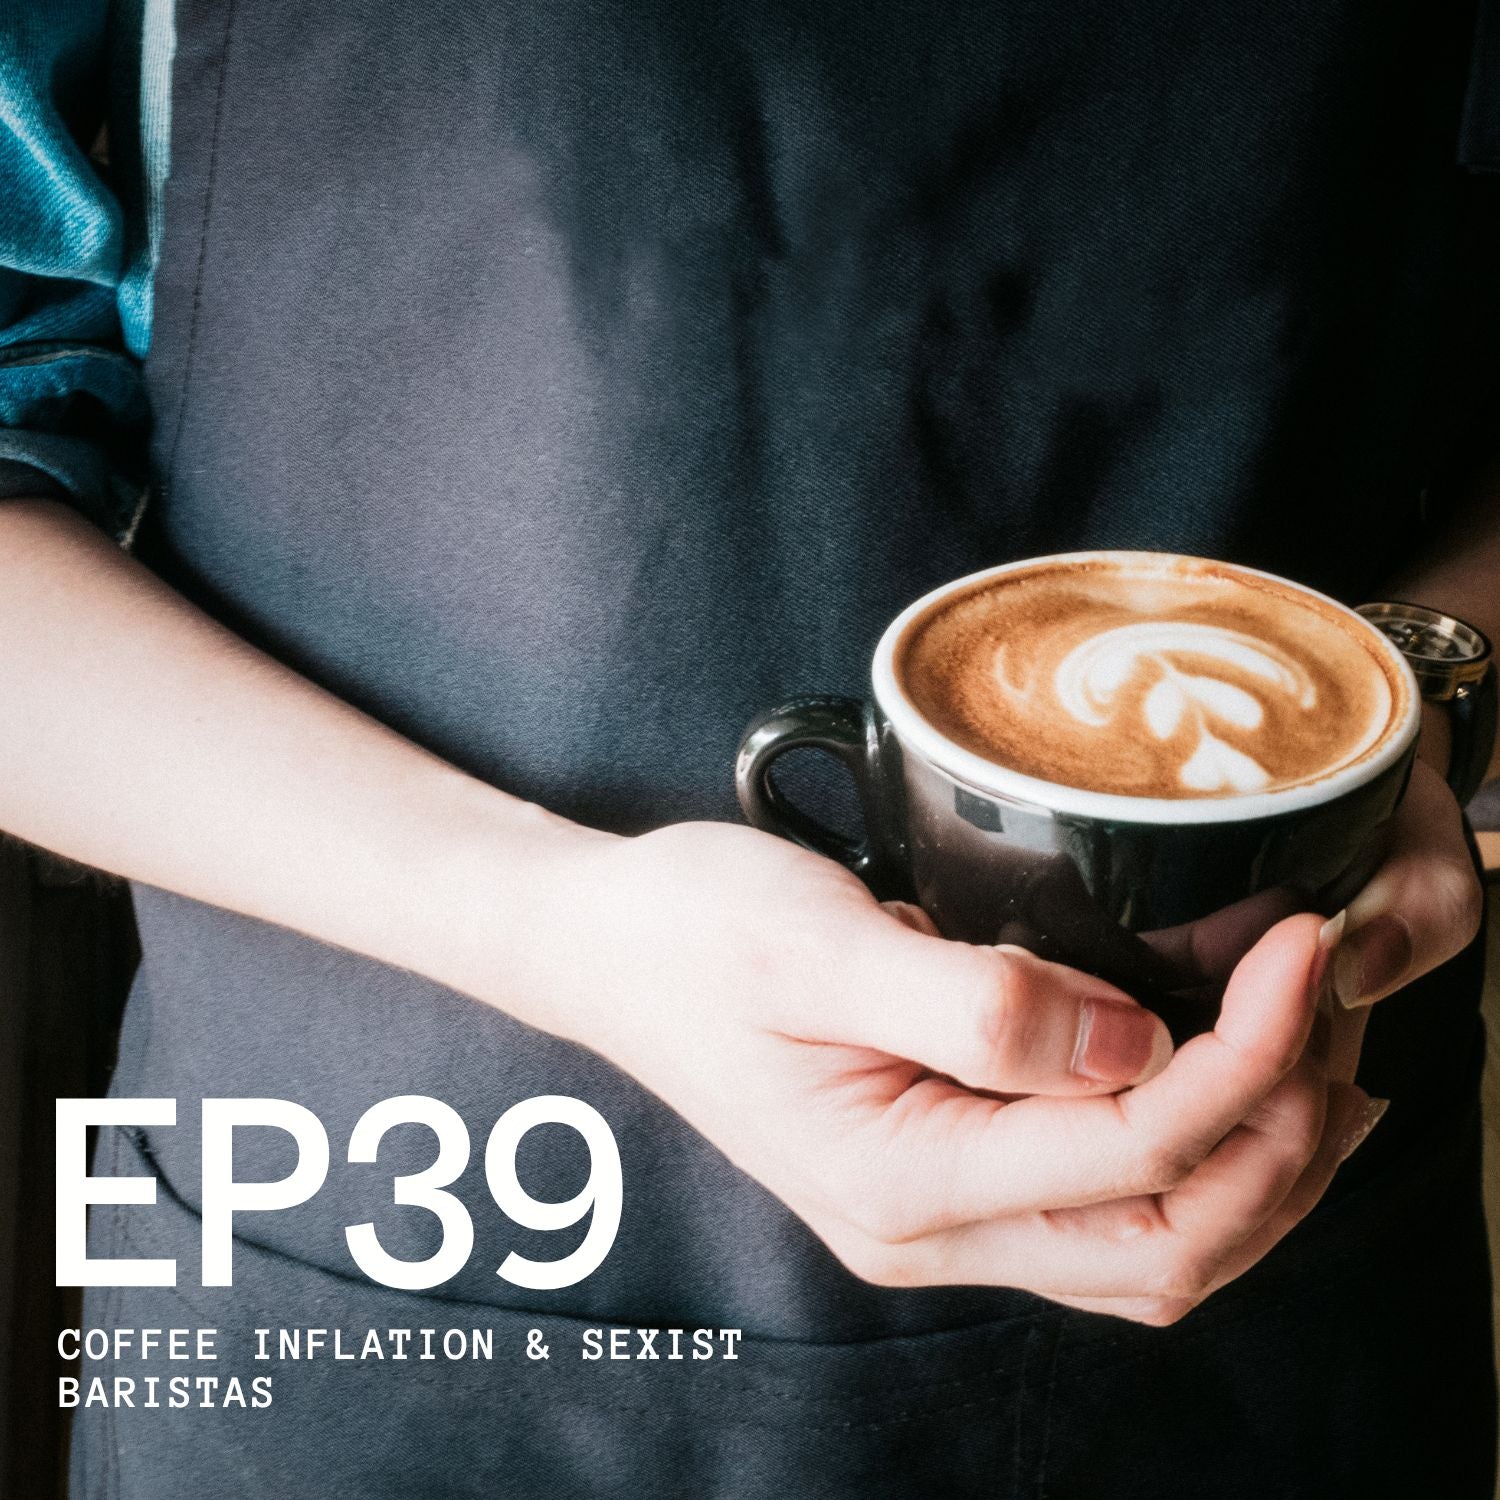 Episode 39 - Inflation, Coffee and the Sexist Barista